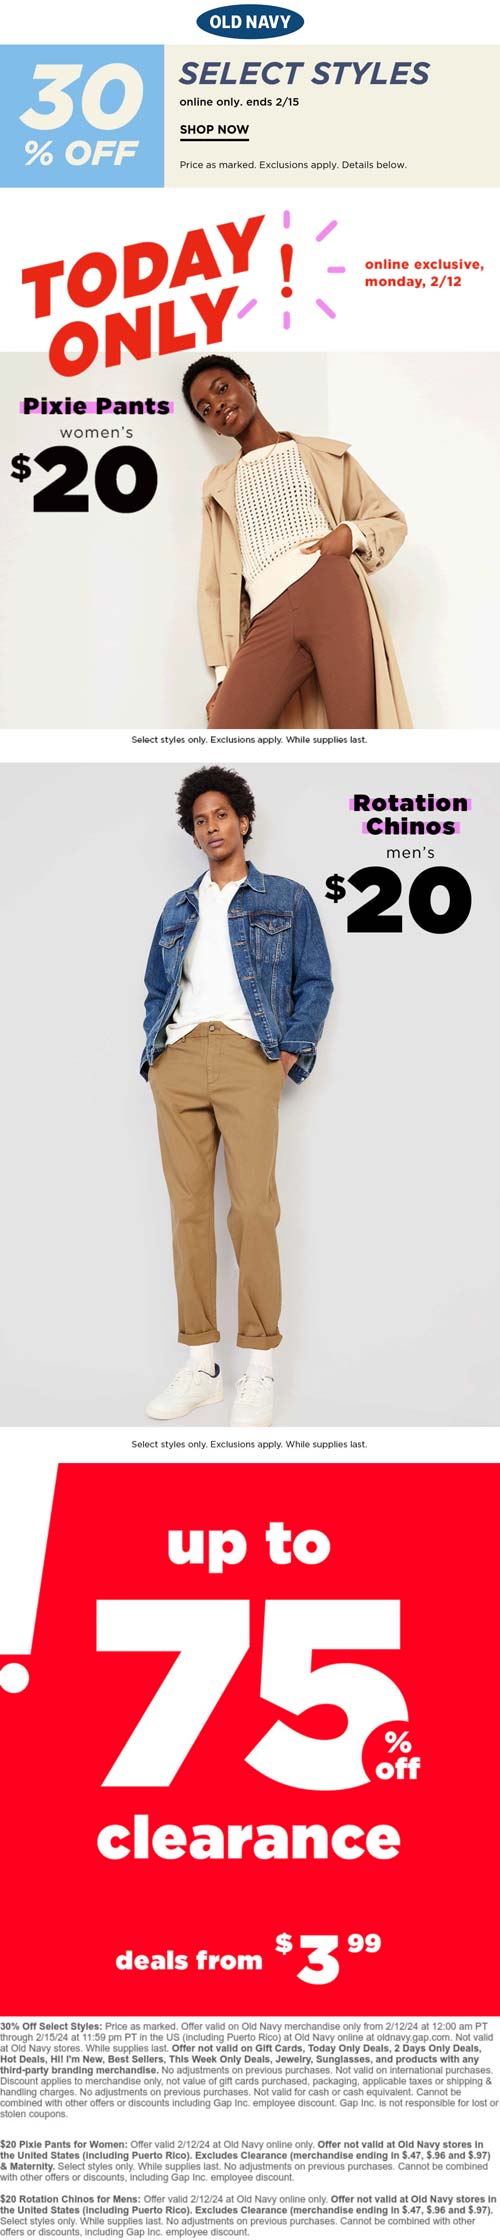 Old Navy stores Coupon  30% off + $20 pixie pants & mens chinos online today at Old Navy #oldnavy 